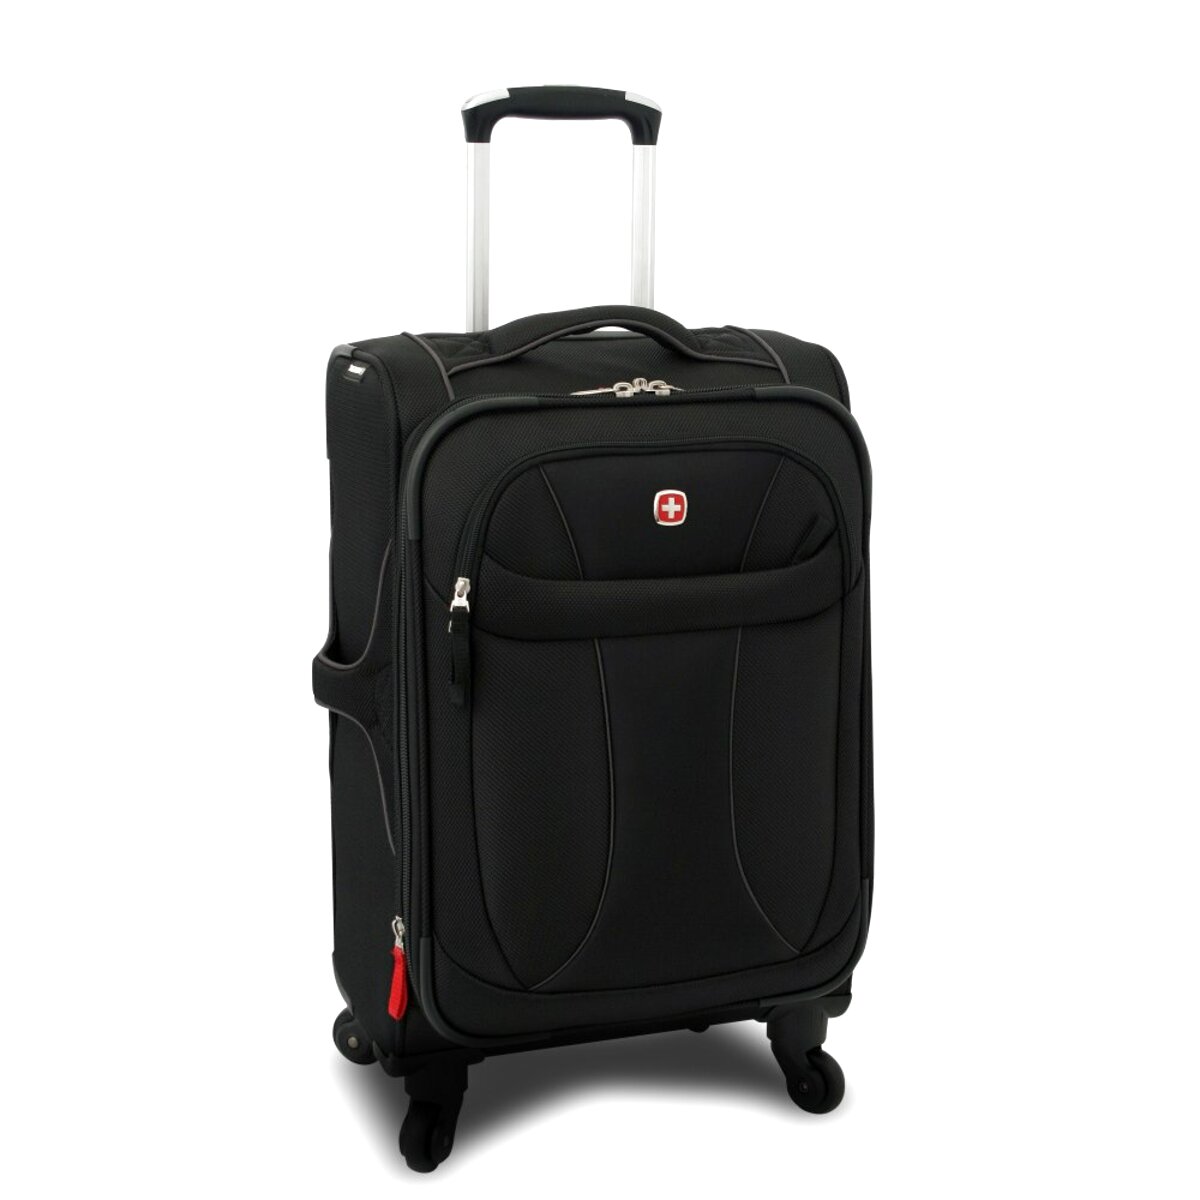 Wenger Luggage for sale in UK | 64 used Wenger Luggages